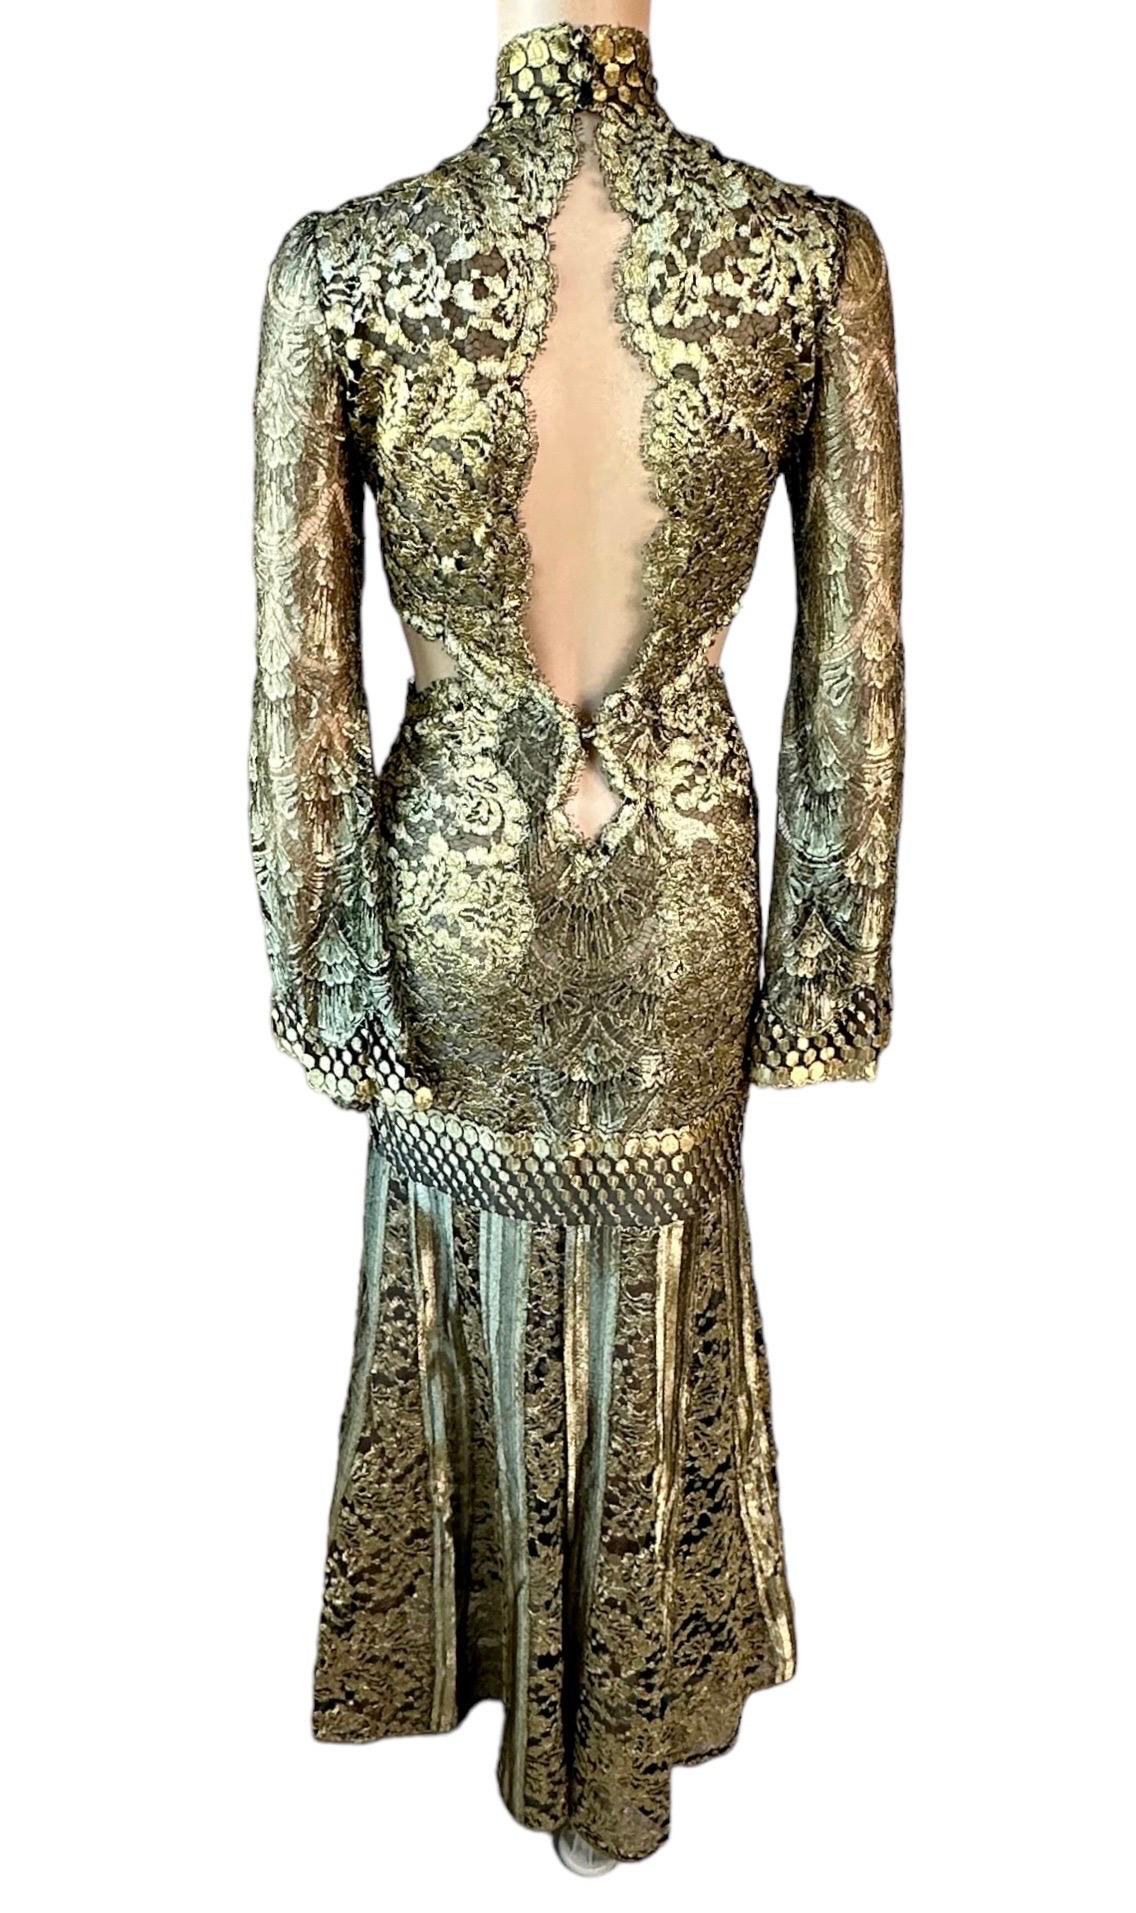 Roberto Cavalli F/W 2016 Runway Gold Sheer Lace Evening Dress Gown For Sale 4